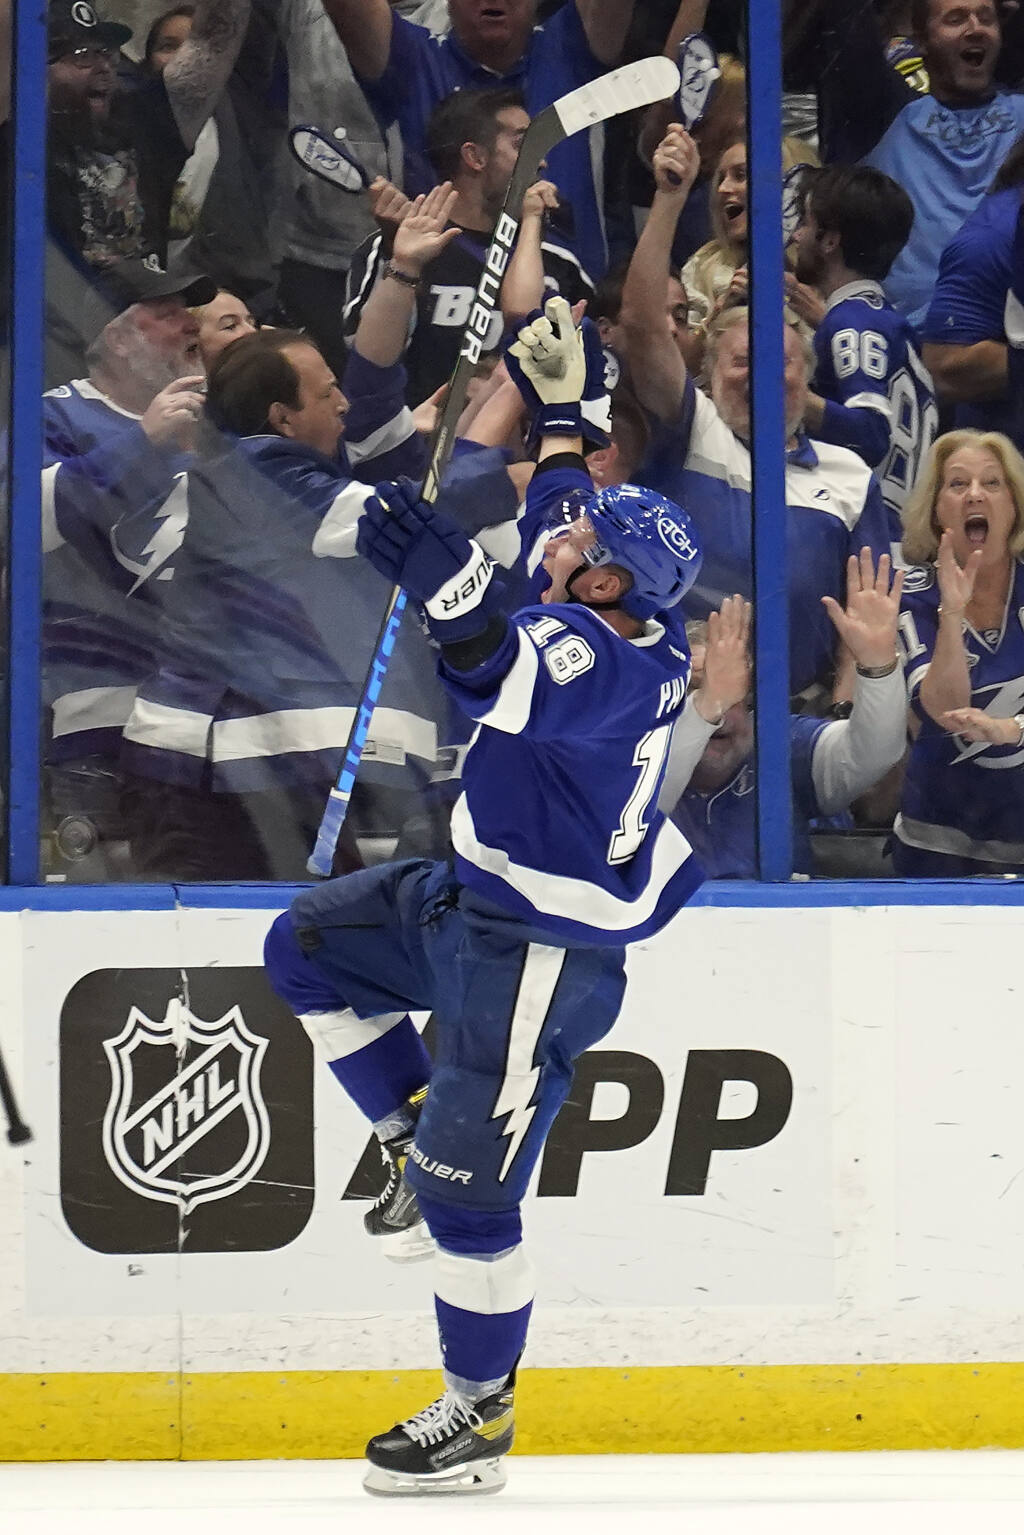 Stanley Cup Playoffs Day 39: Ondrej Palat scores another late goal